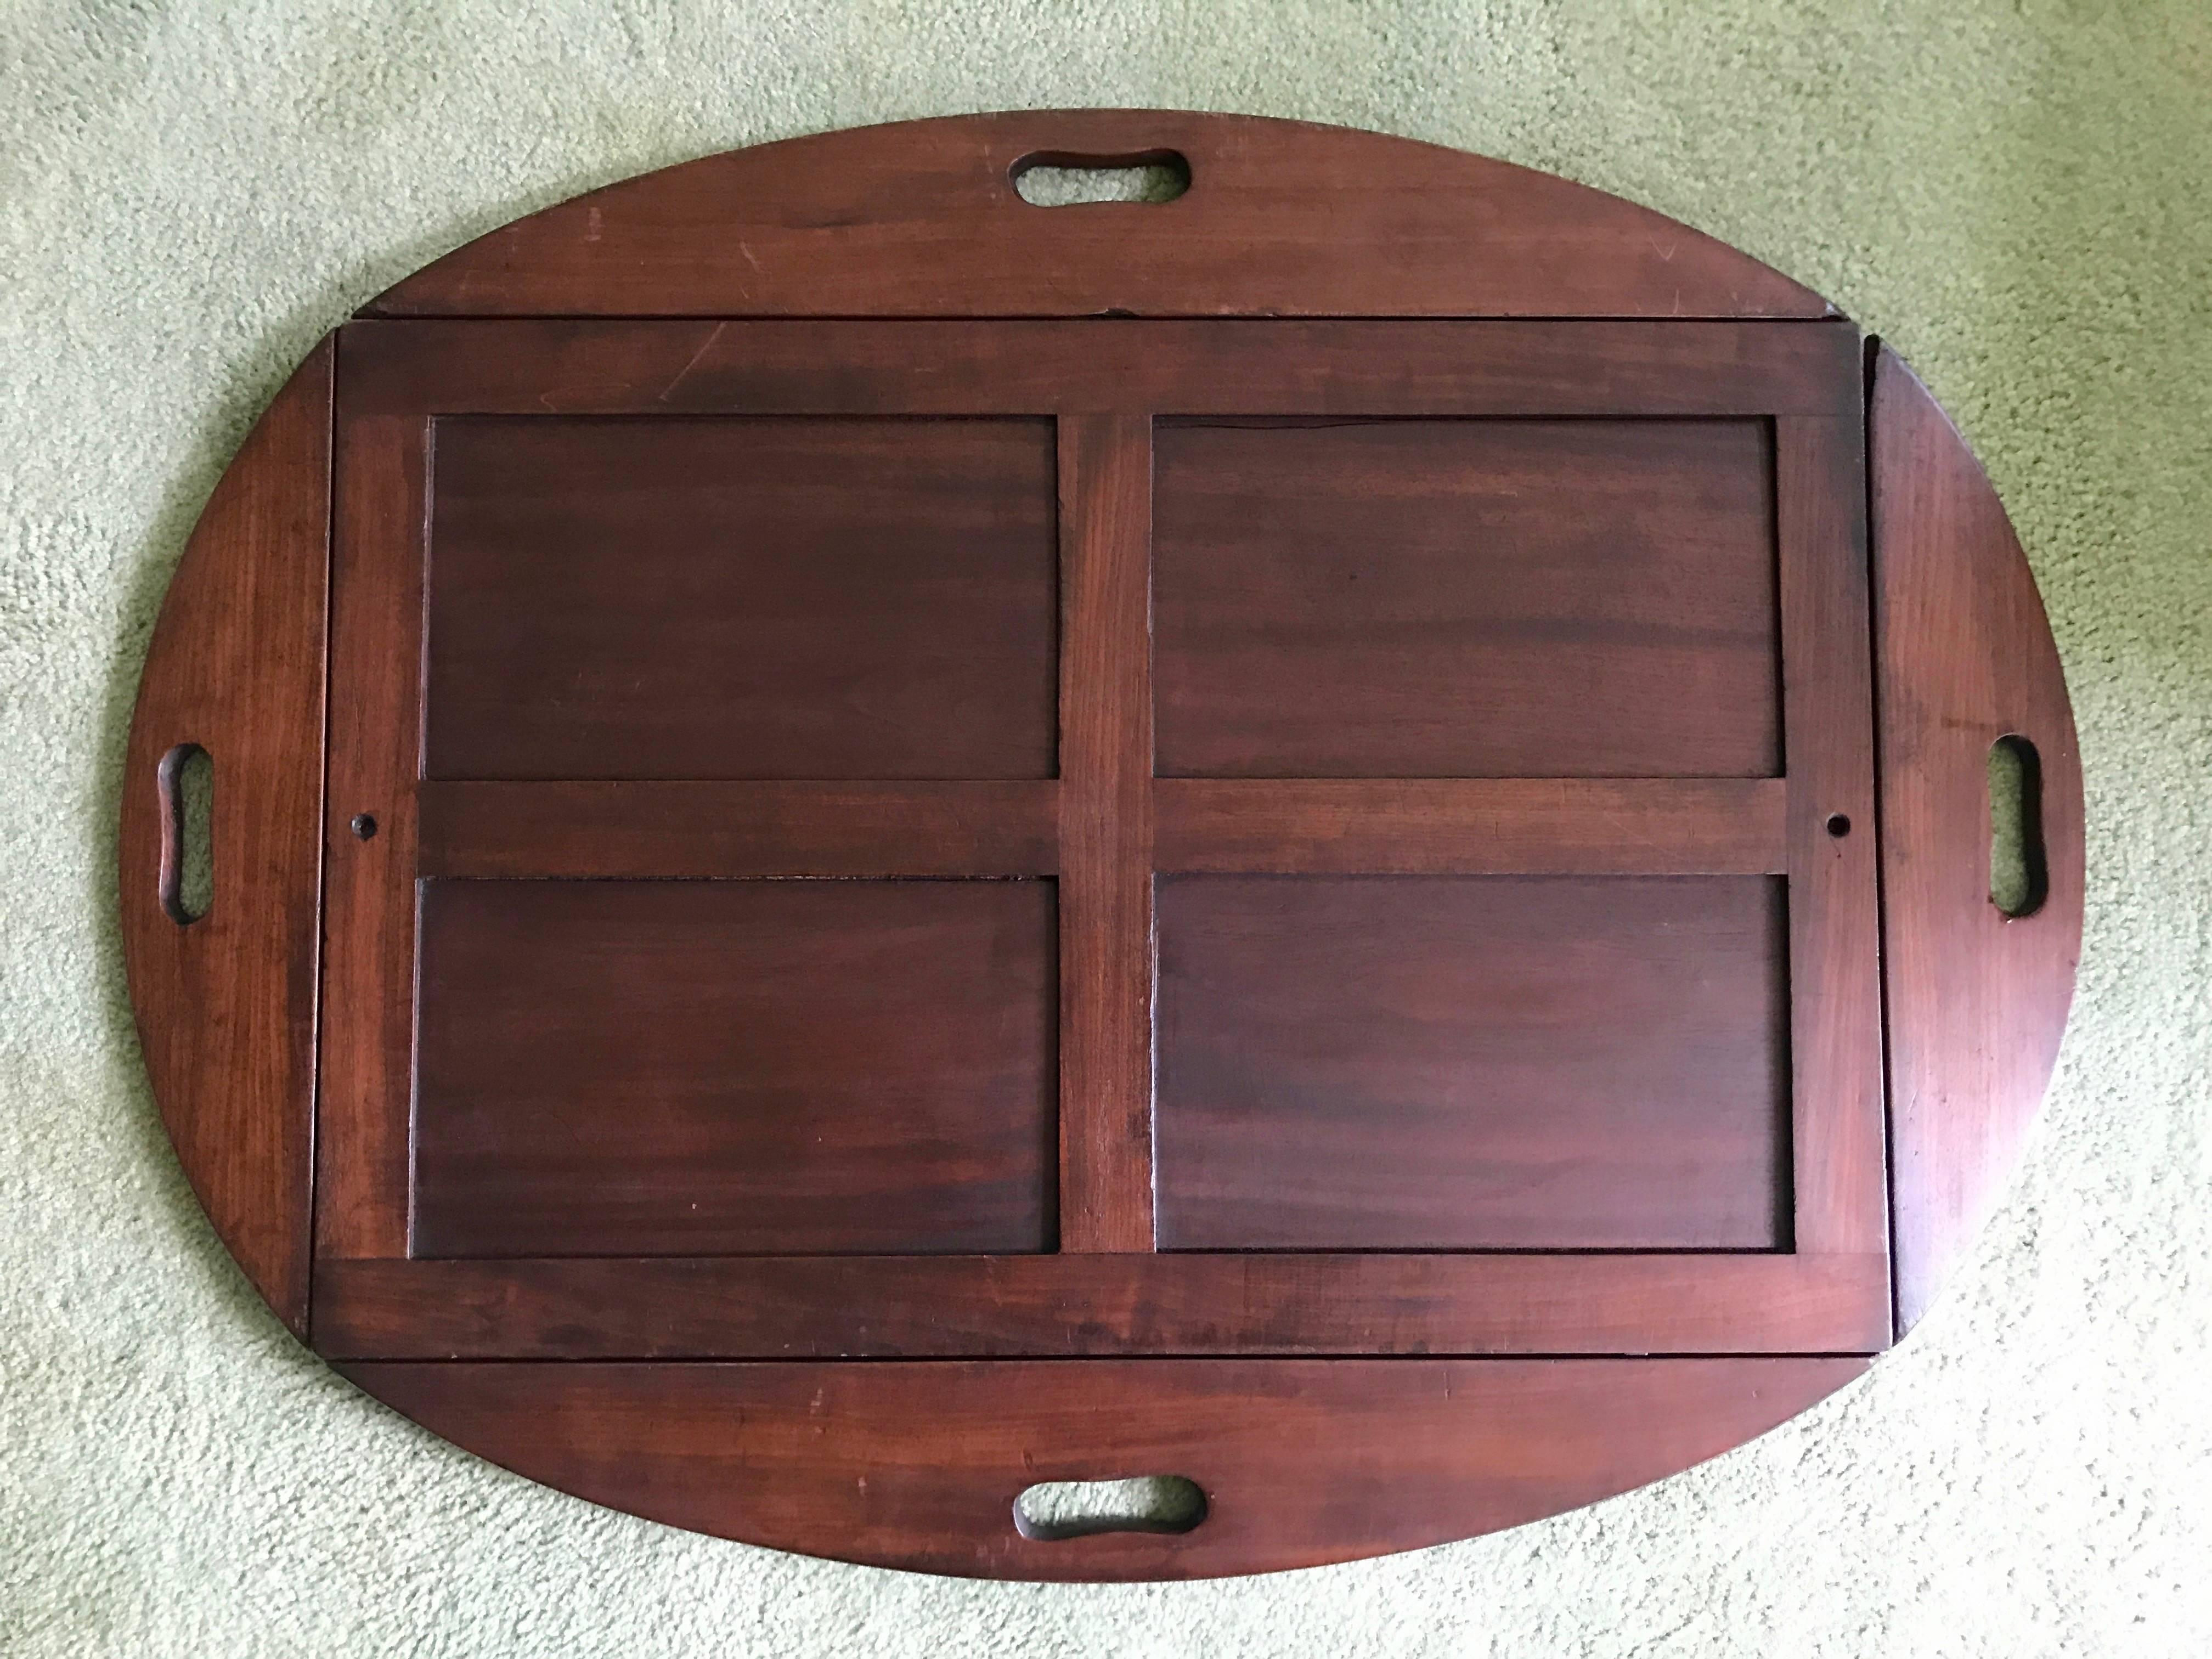 George III mahogany Butler’s tray circa 1780, with brass bound hinges. Stand is not original and much newer. Measures: 31.5” W 39.5” L 25” H Handles up: 22” W x 31” L.